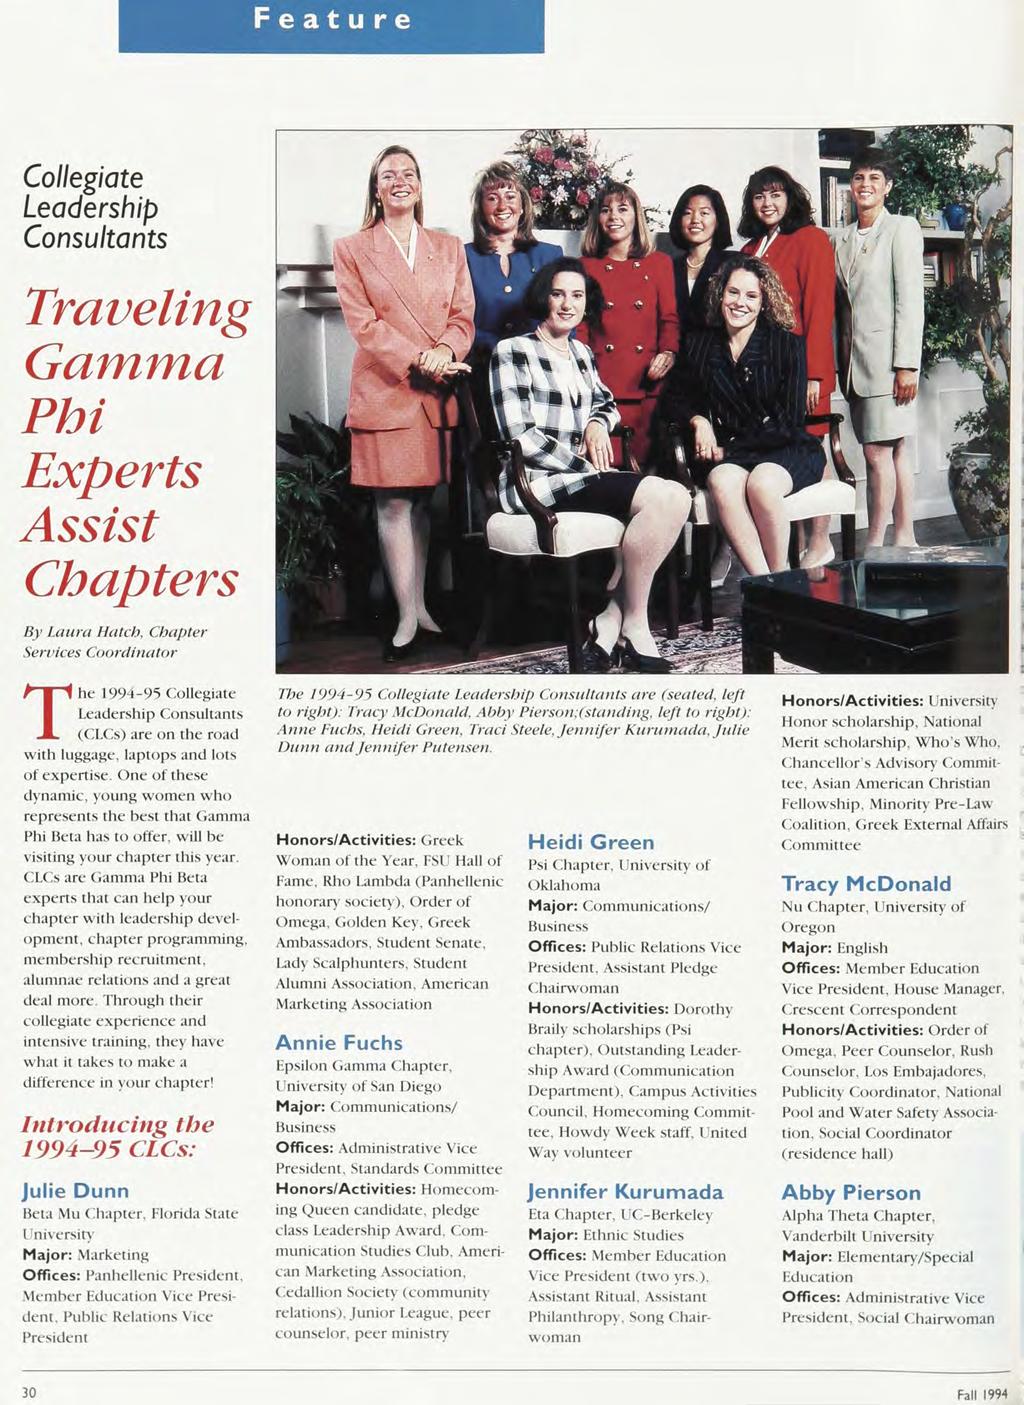 Feature Collegiate Leadership Consultants Traveling Gamma Phi Experts Assist Chapters By Laura Hatch, Chapter Seri'ices Coordinator The 199495 Collegiate Leadership Consultants (CLCs) are on the road